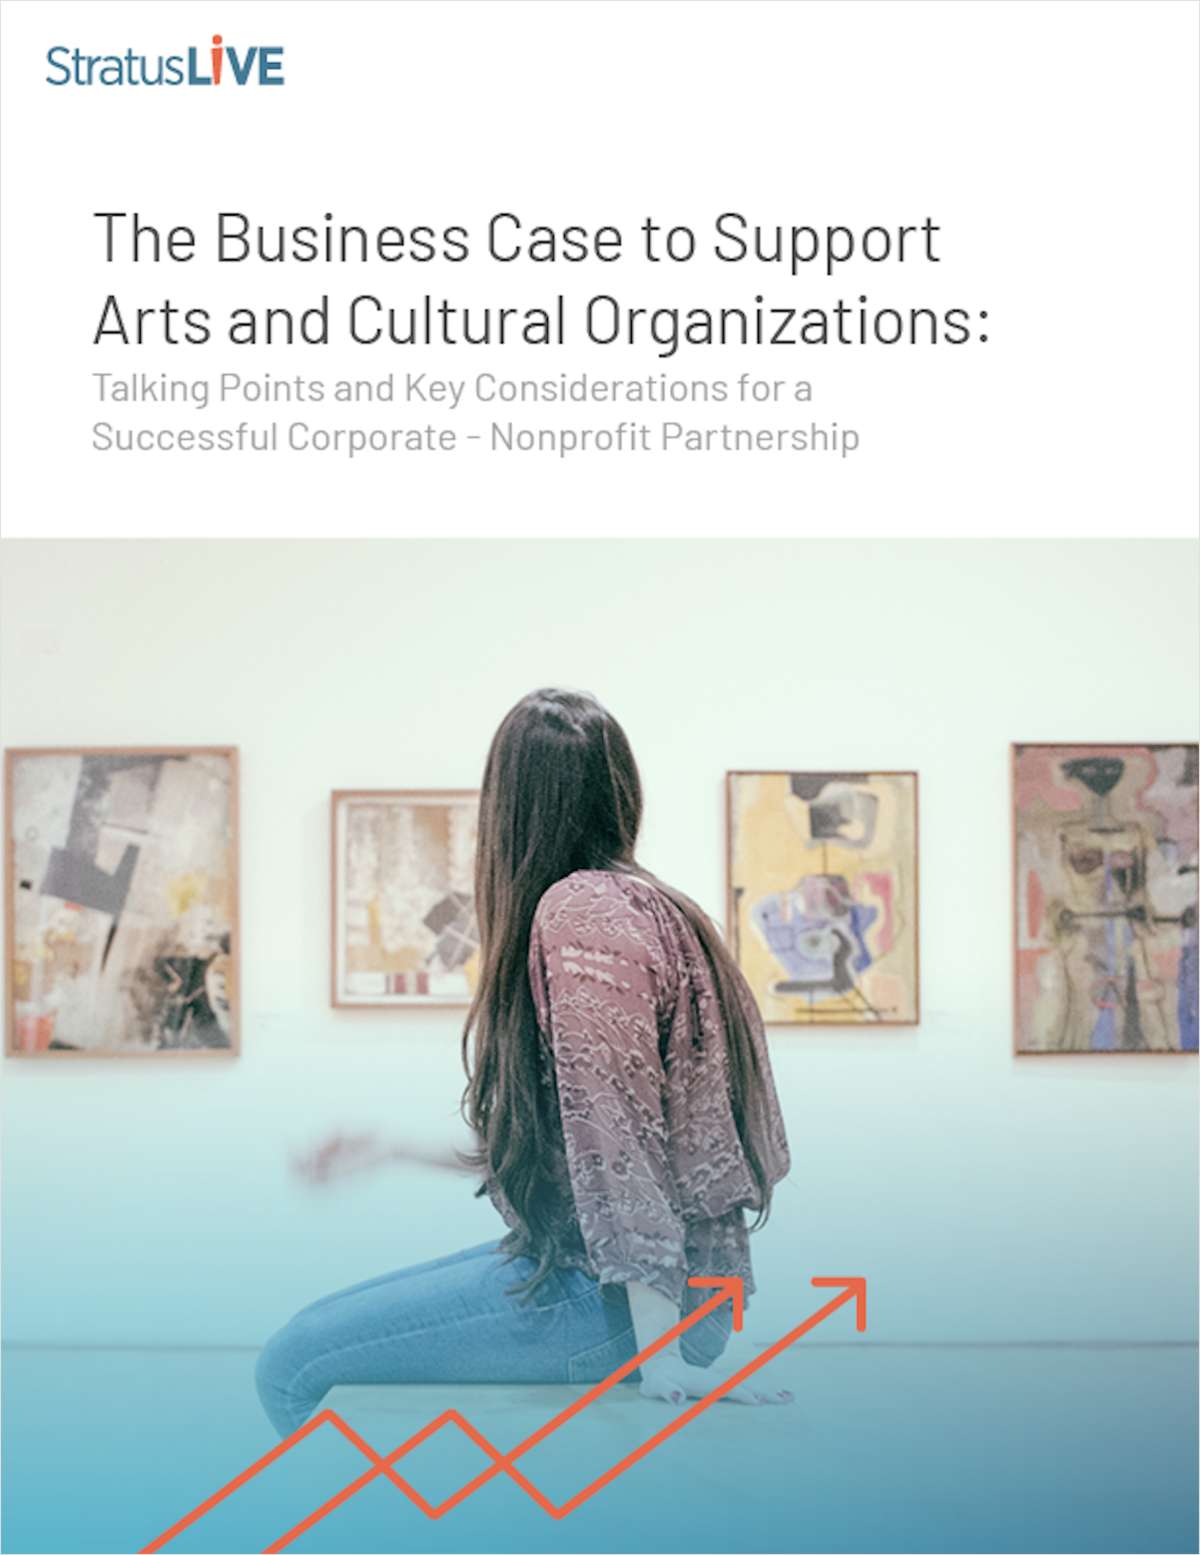 The Business Case to Support Arts and Cultural Organizations